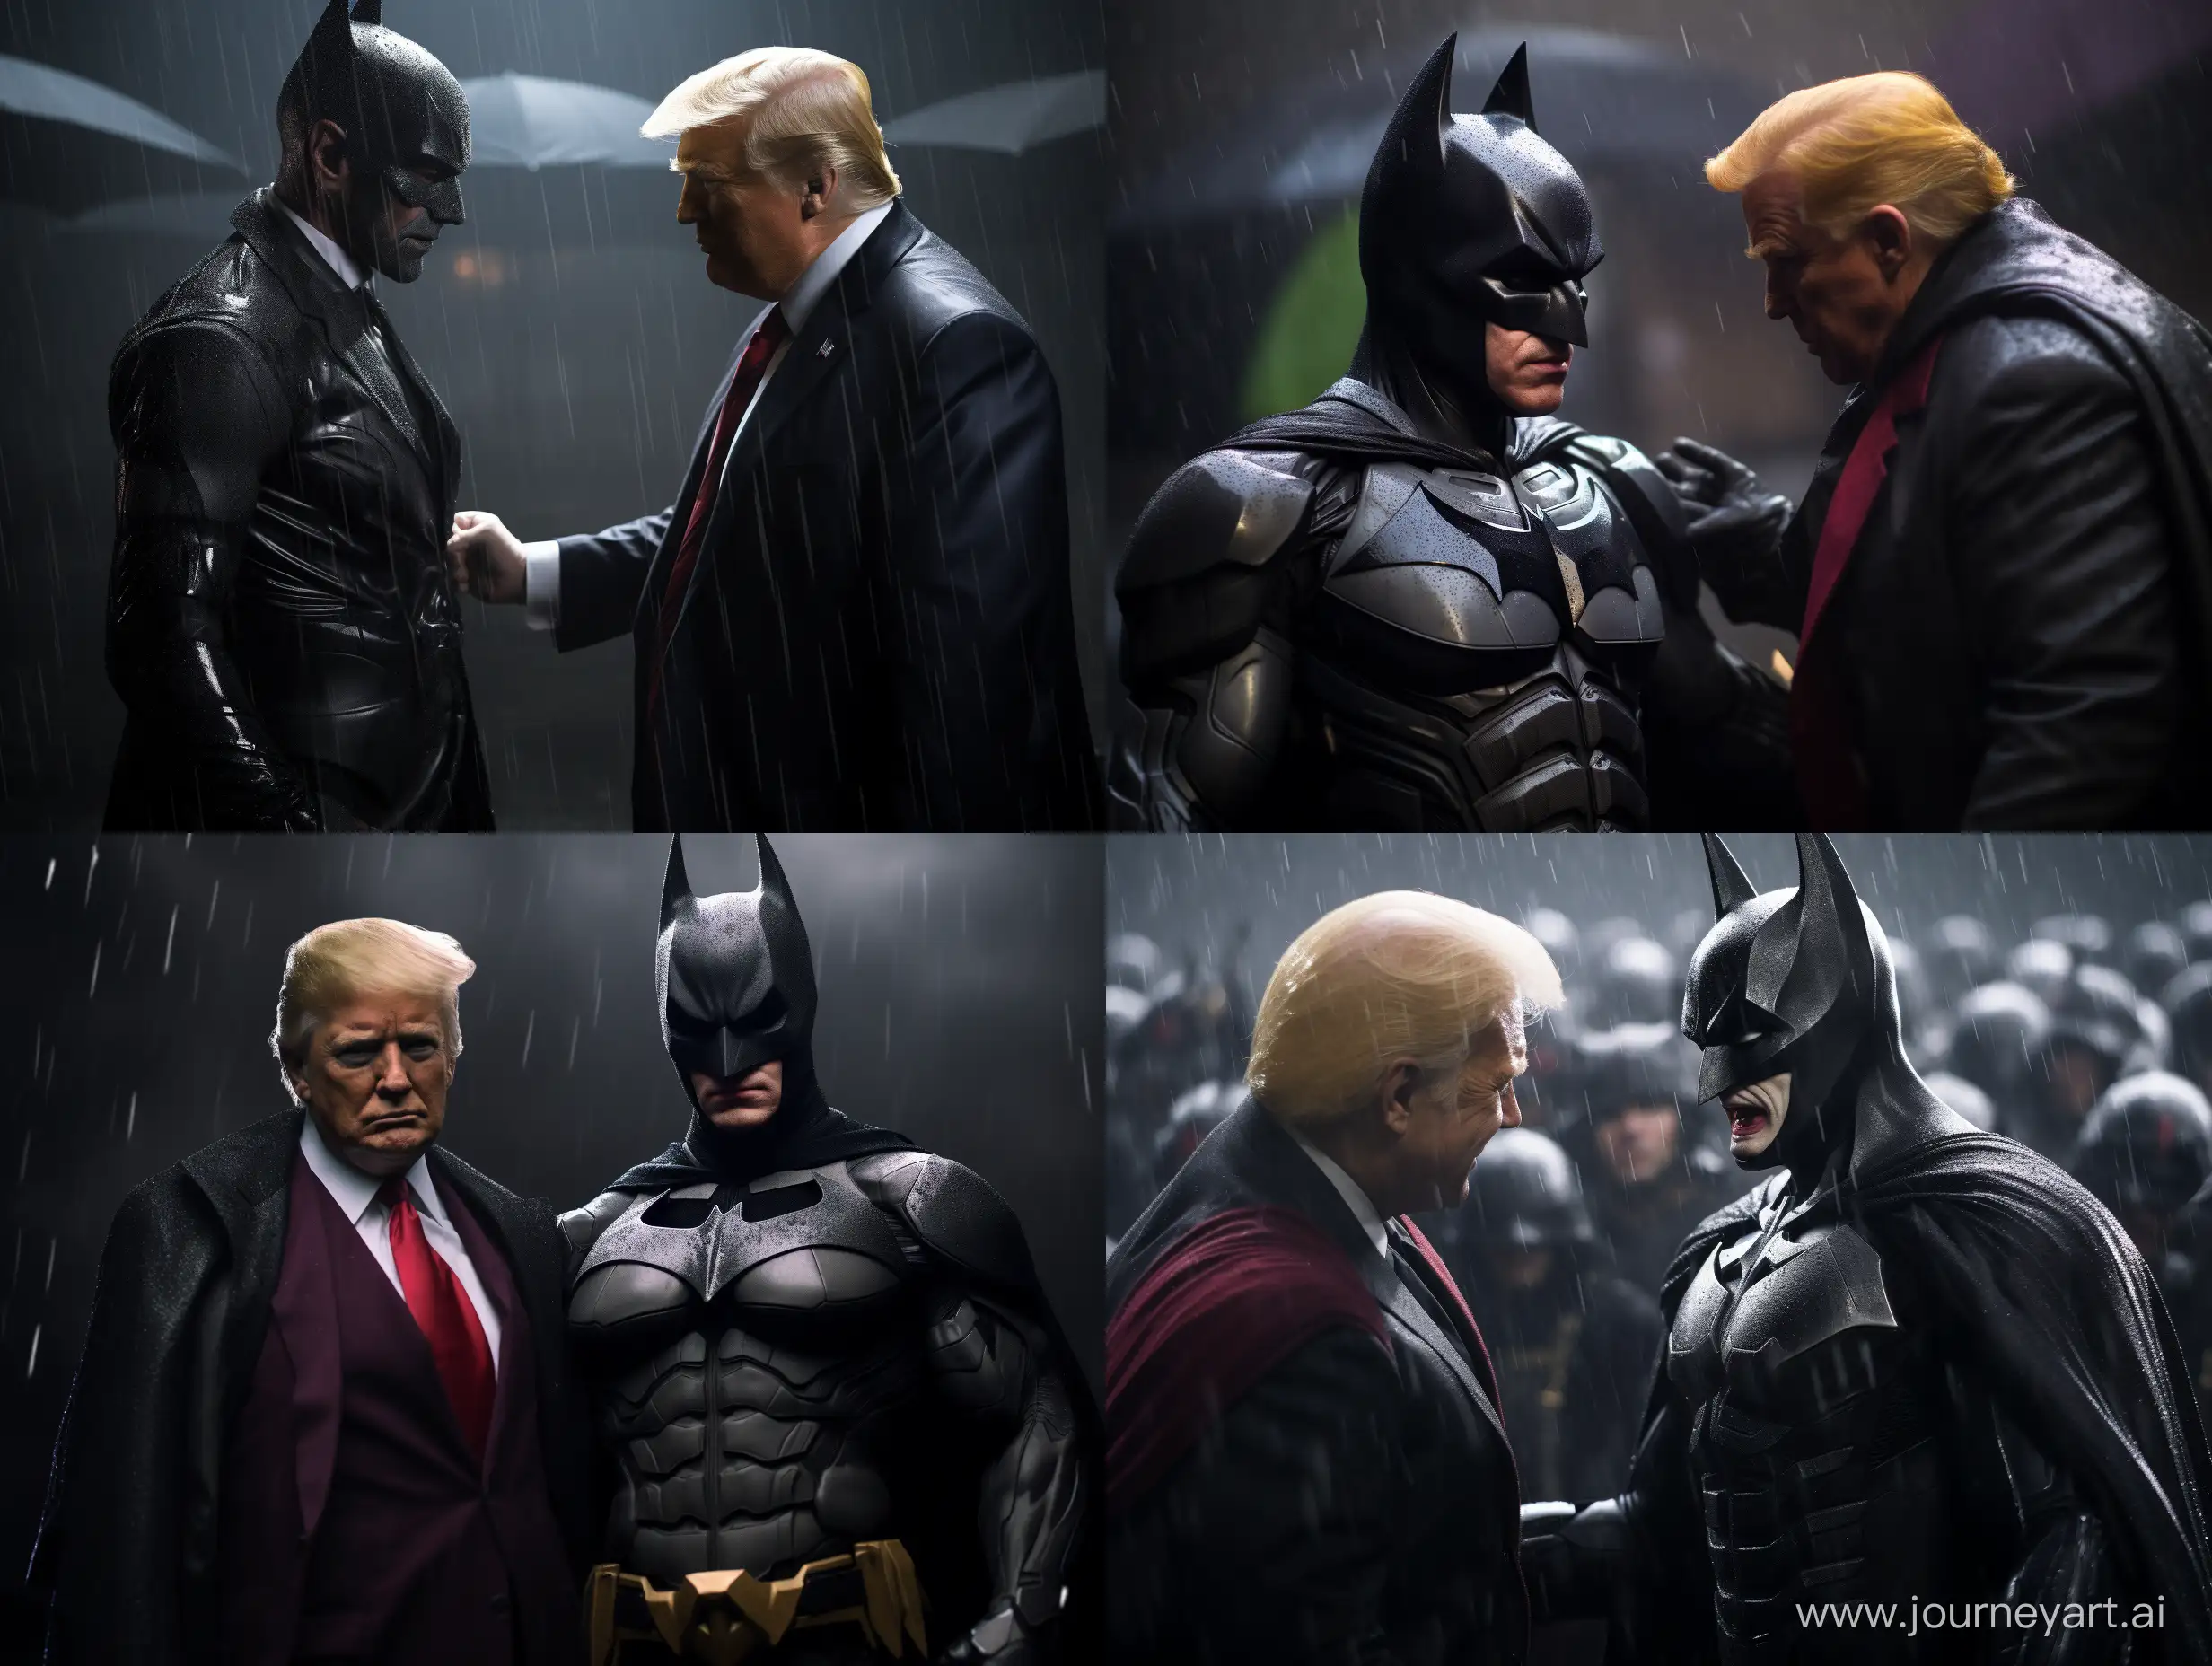 Donald Trump in the outfit of Batman meets Joe Biden in the outfit of Joker during the rain